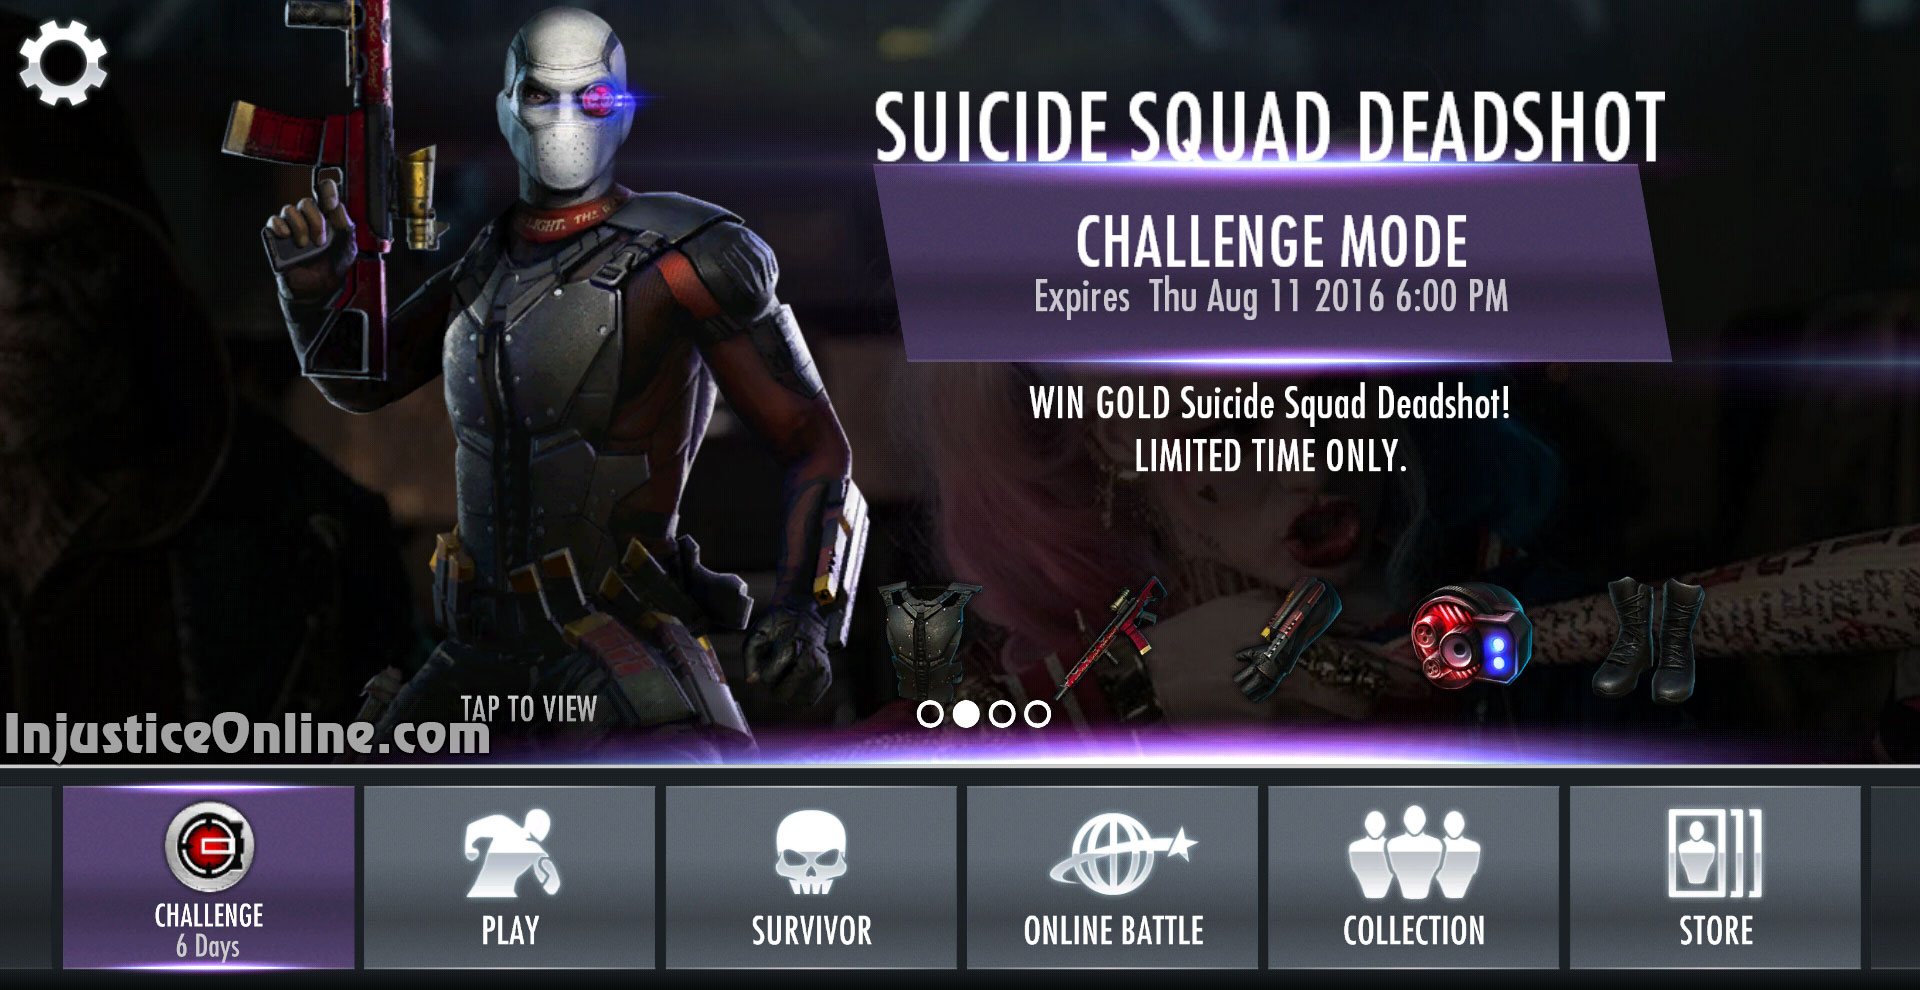 Suicide Squad Deadshot is the first Suicide Squad character from the Injust...